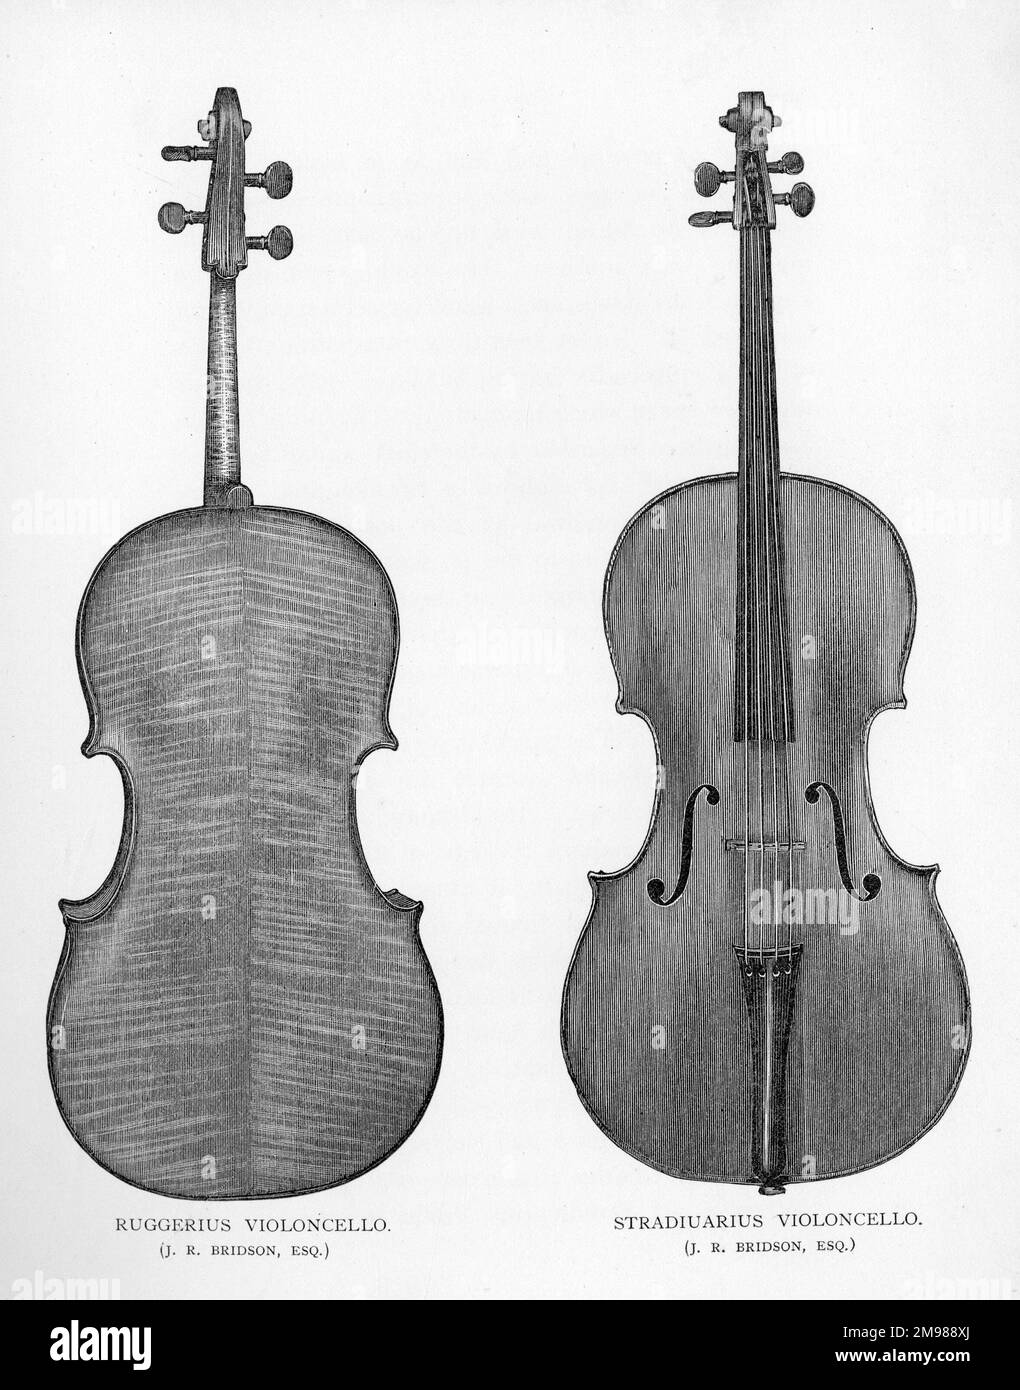 Two cellos by Ruggerius and Stradivarius, both belonging to J R Bridson. Stock Photo